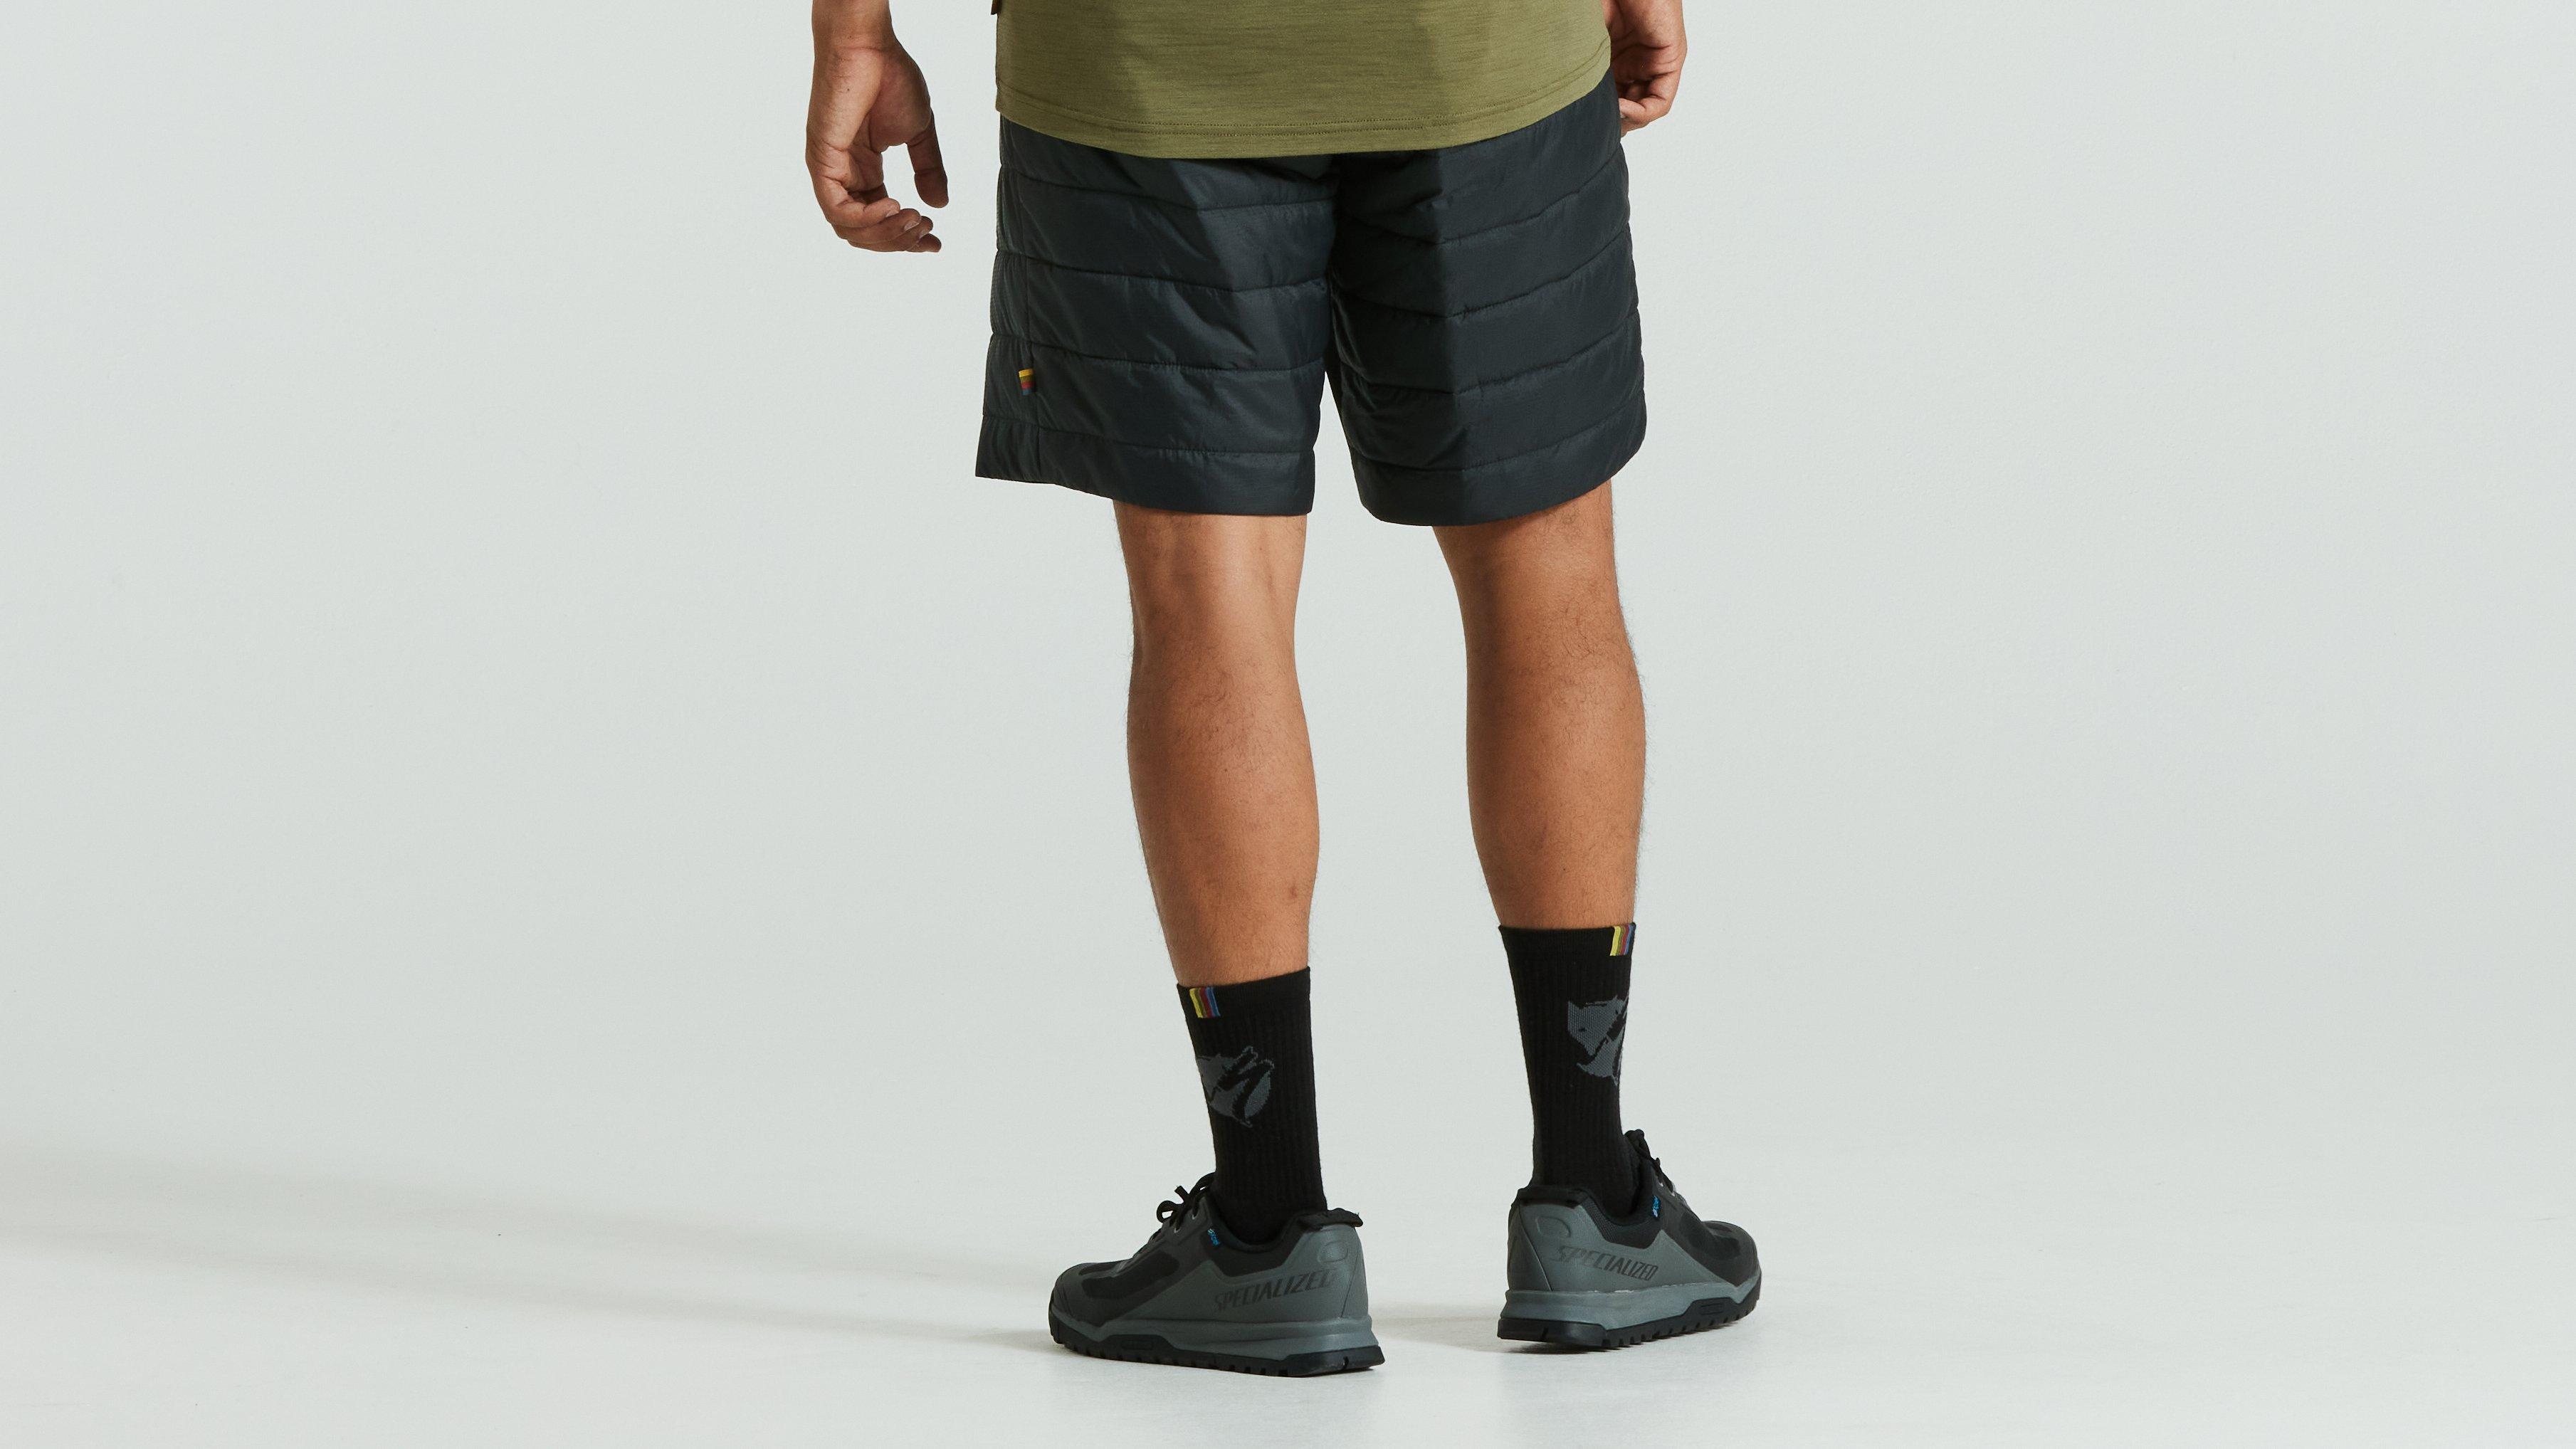 https://assets.specialized.com/i/specialized/64522-270_APP_S-F-THERMO-SHORT-BLK-MEN-M_BACK?$scom-pdp-product-image$&fmt=auto